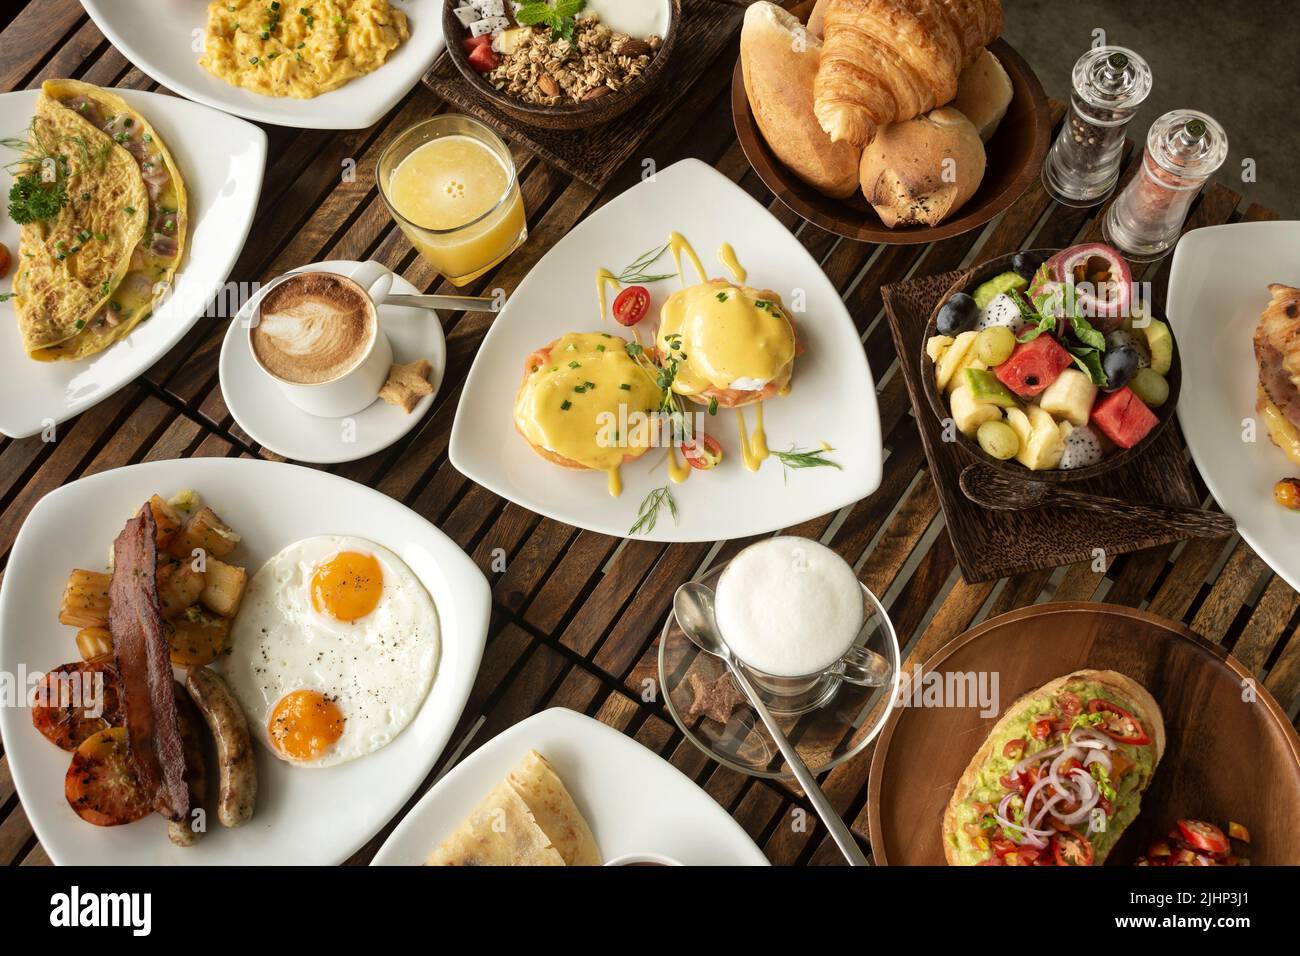 many mixed western breakfast food items on cafe table Stock Photo